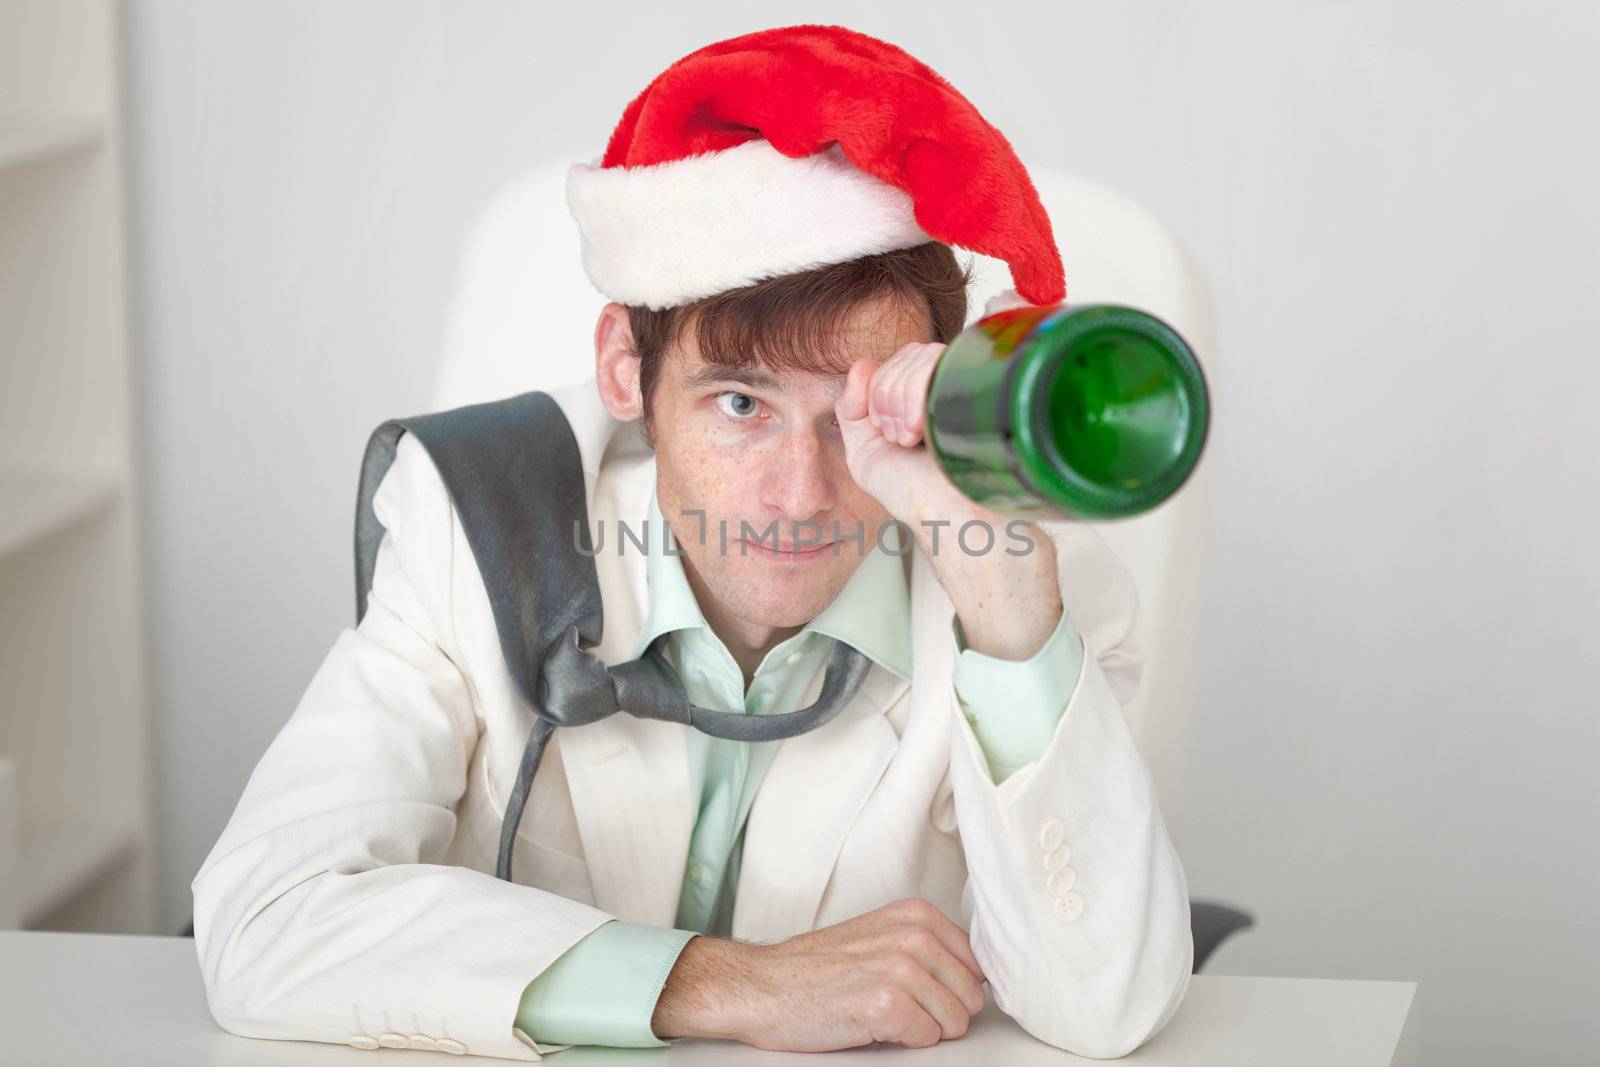 Amusing guy in Christmas cap with bottle in a hand by pzaxe